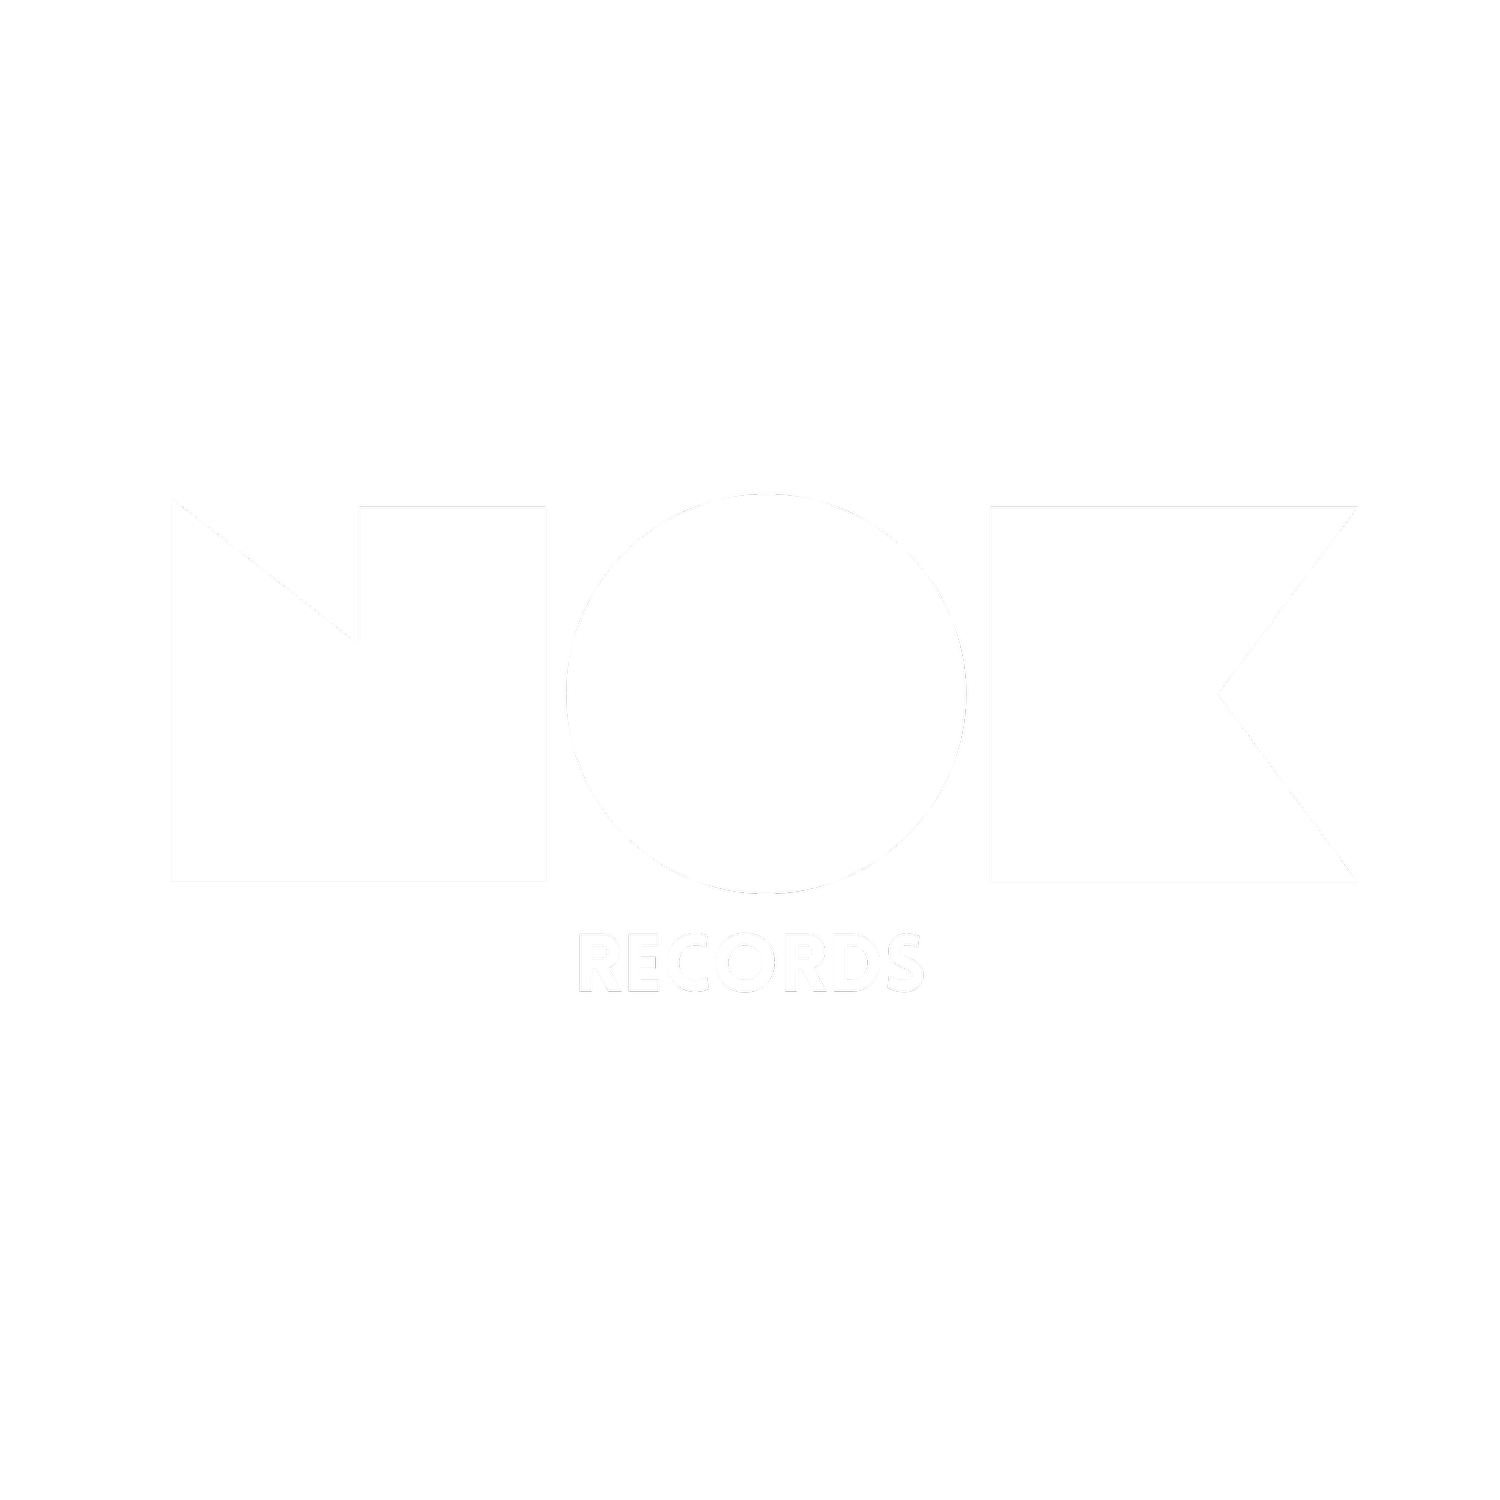 NEXT OF KIN RECORDS